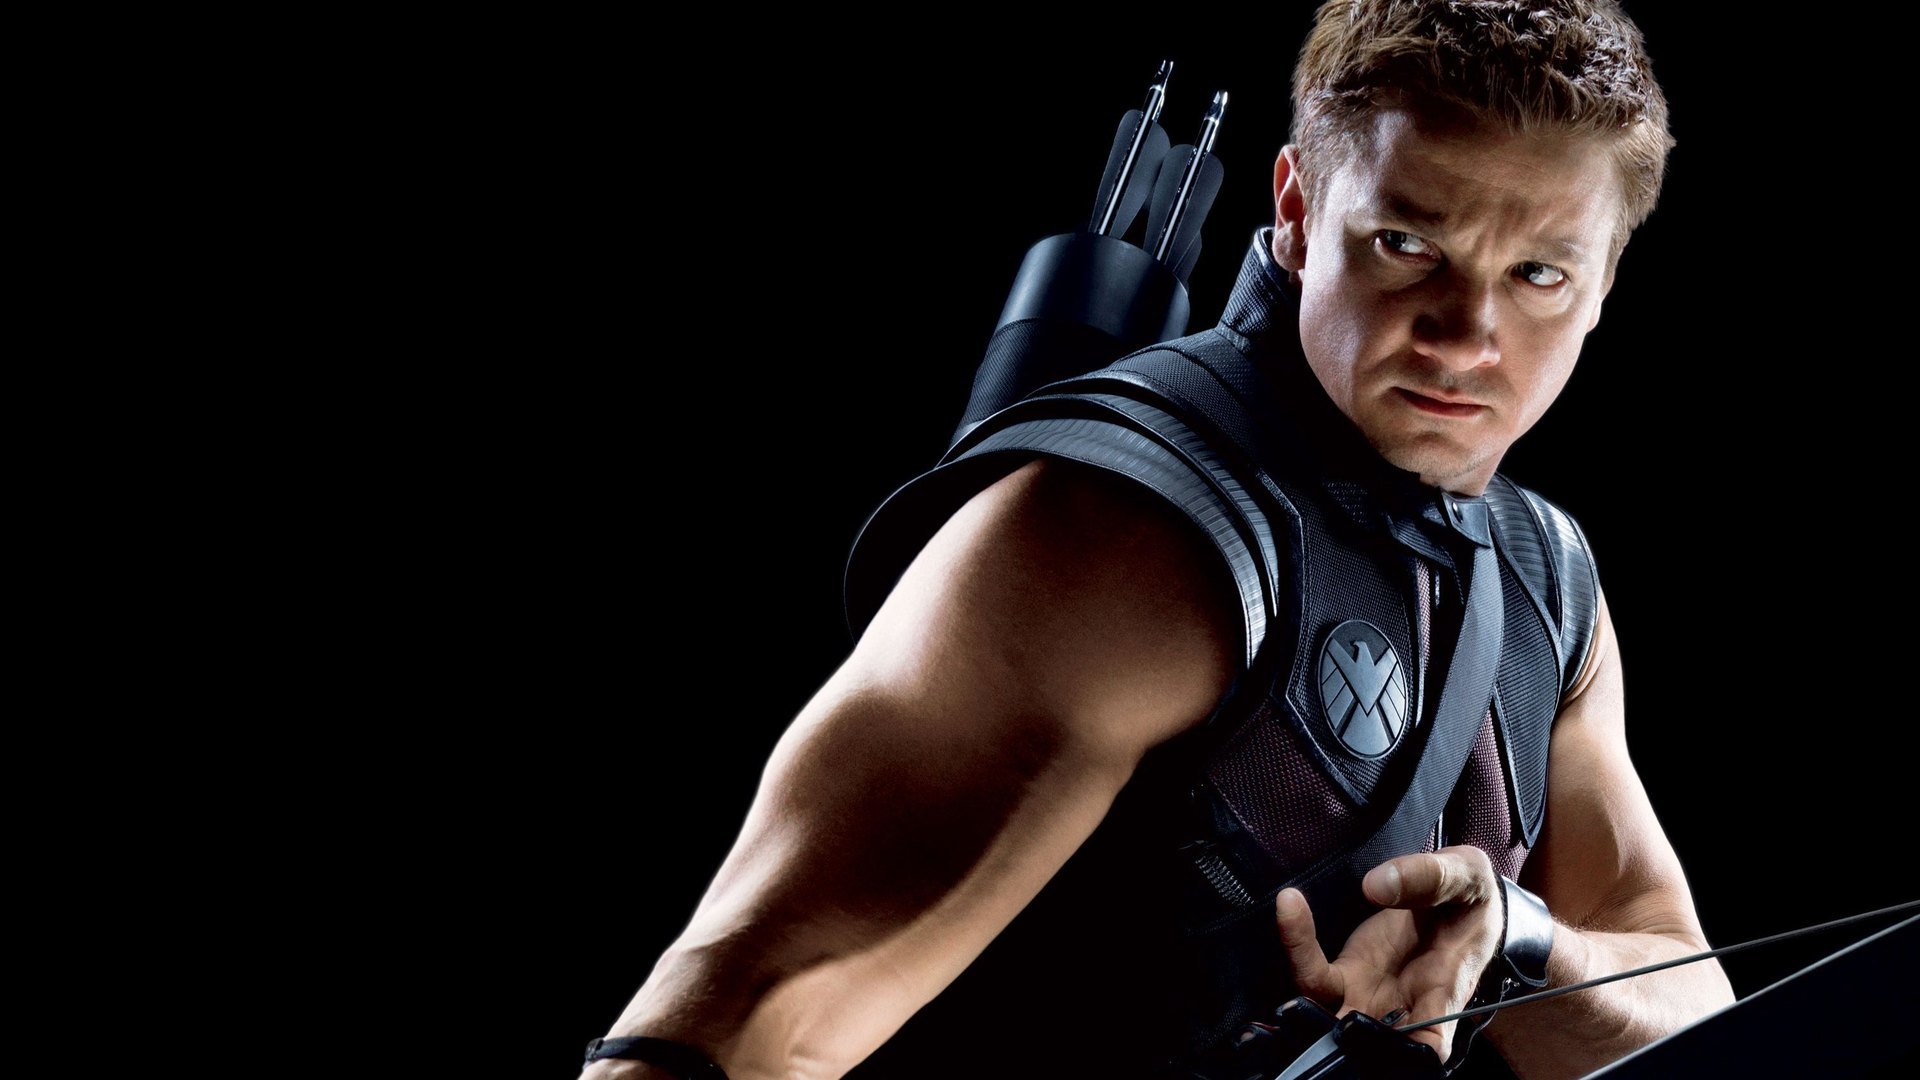 Hawkeye Wallpaper Image Photos Pictures